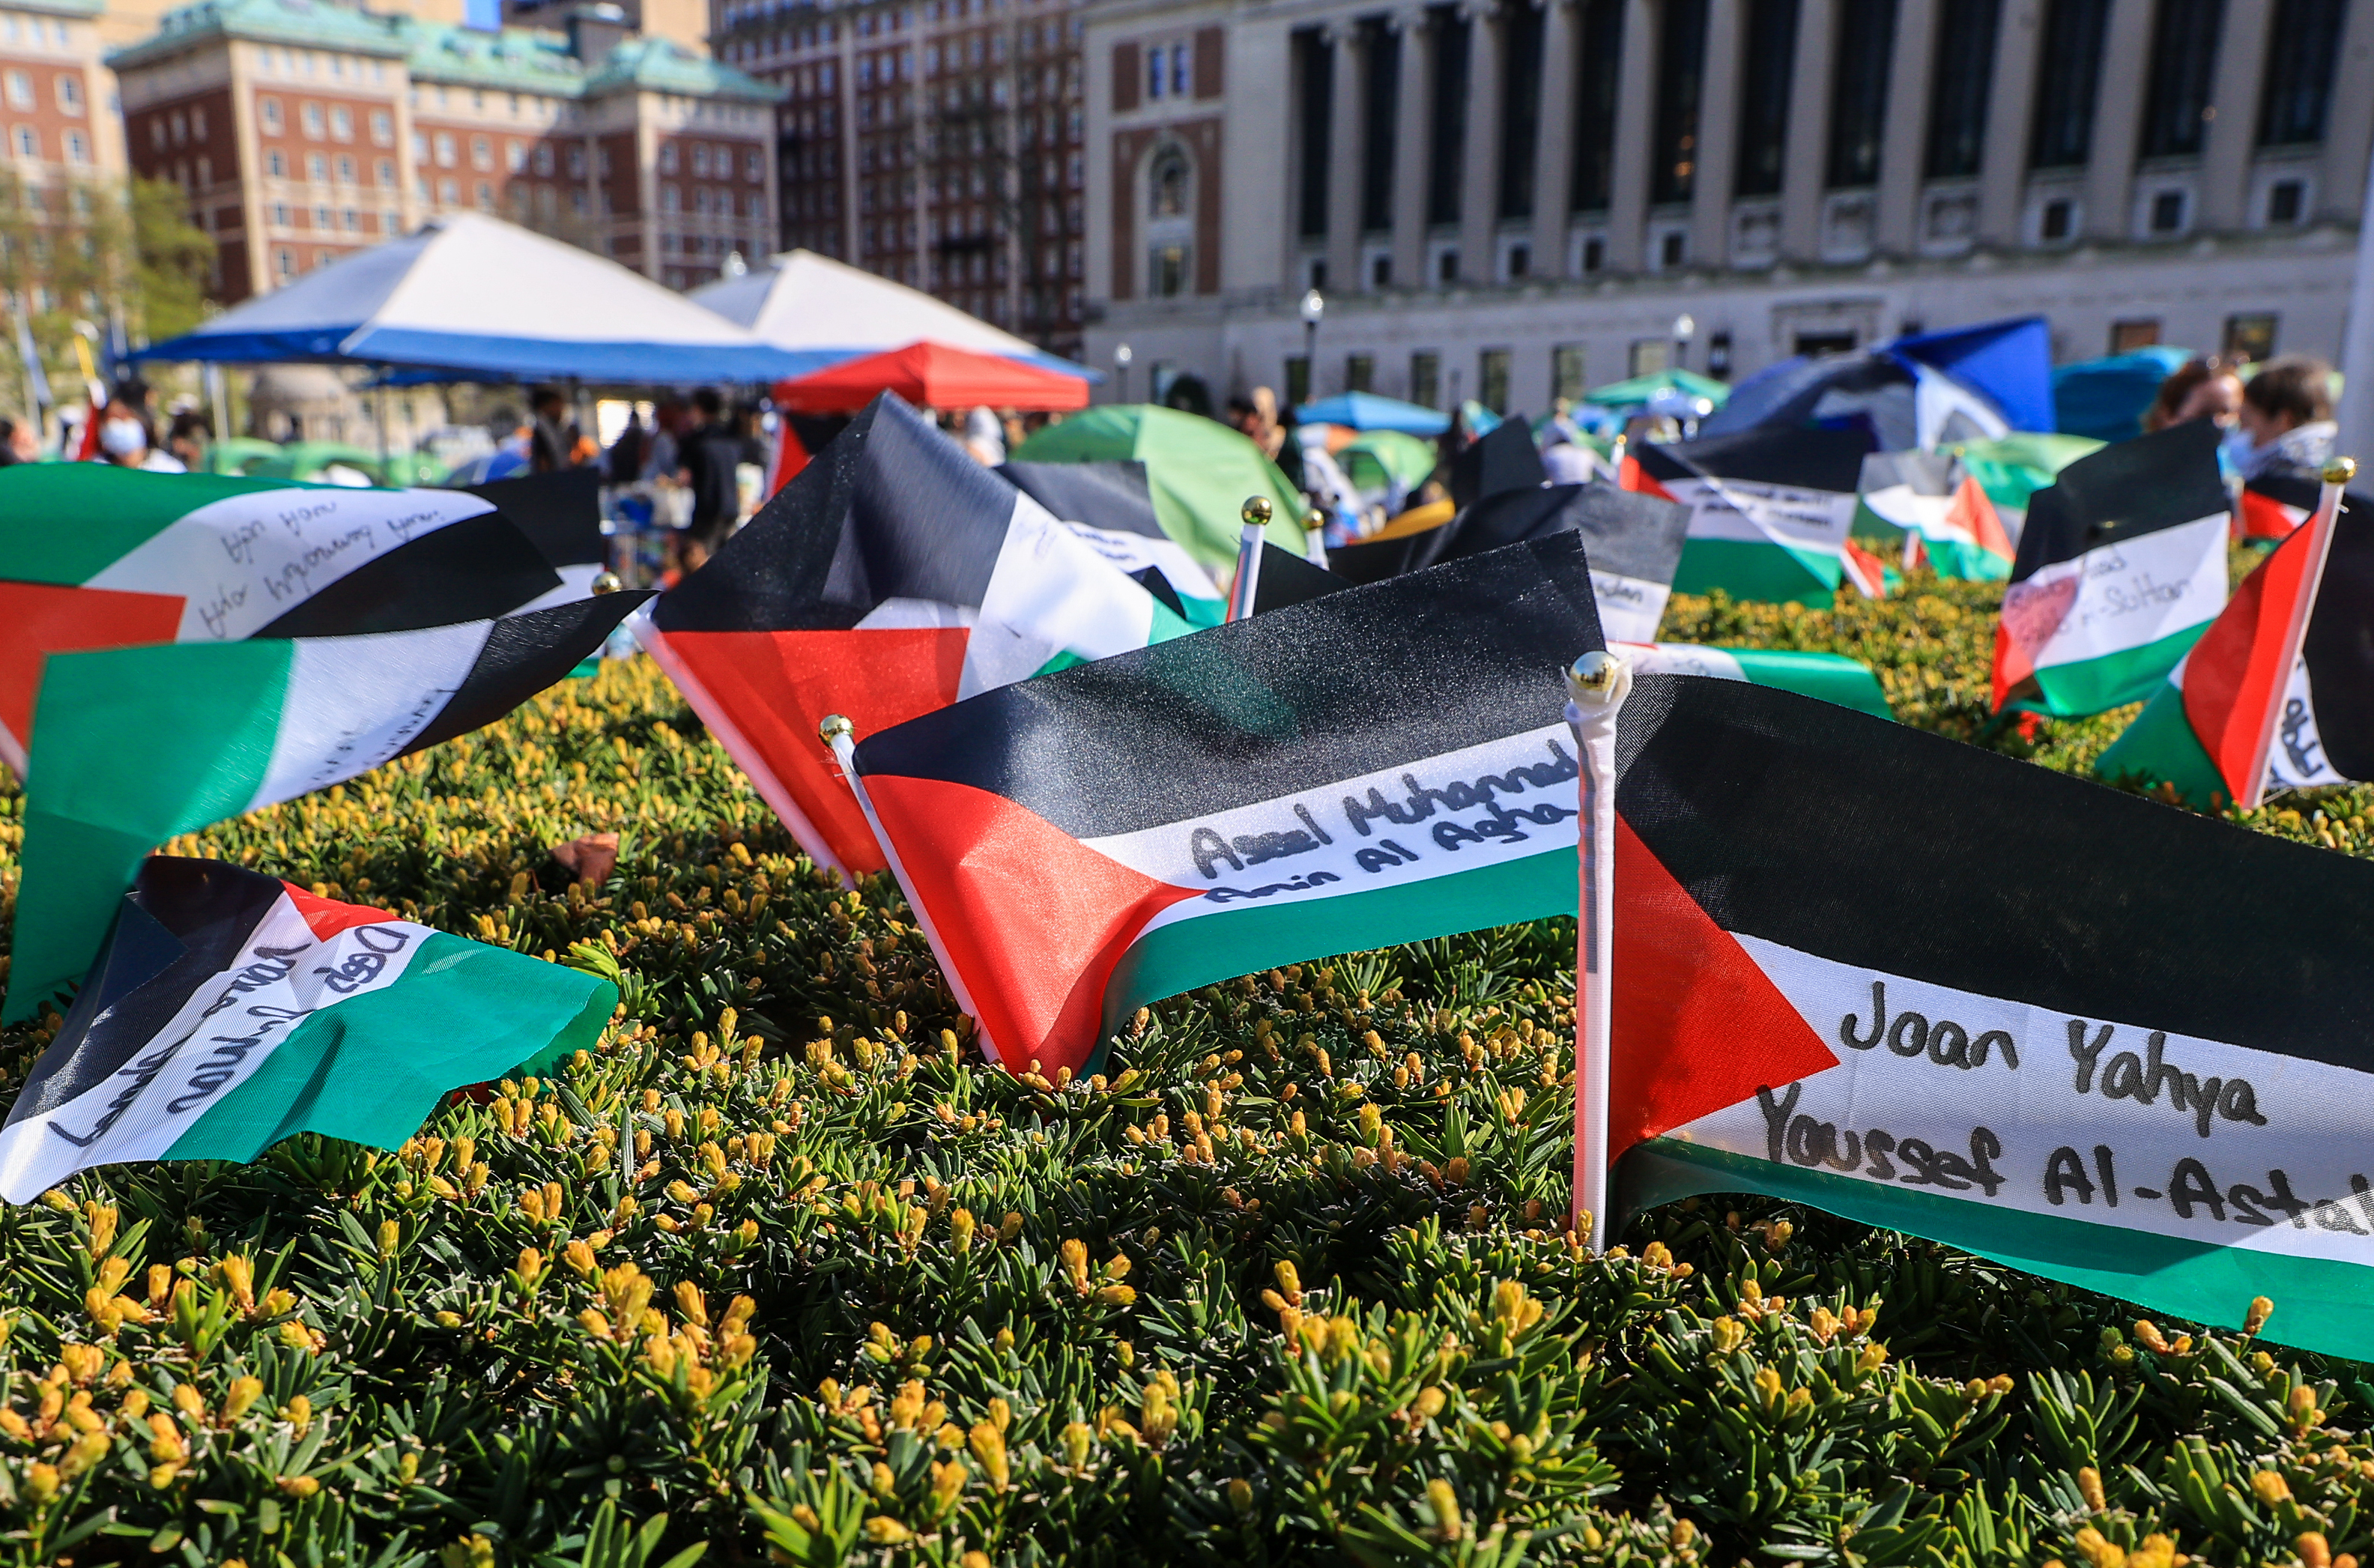 A field of Palestinian flags with names on them, planted in a public space for an event or demonstration